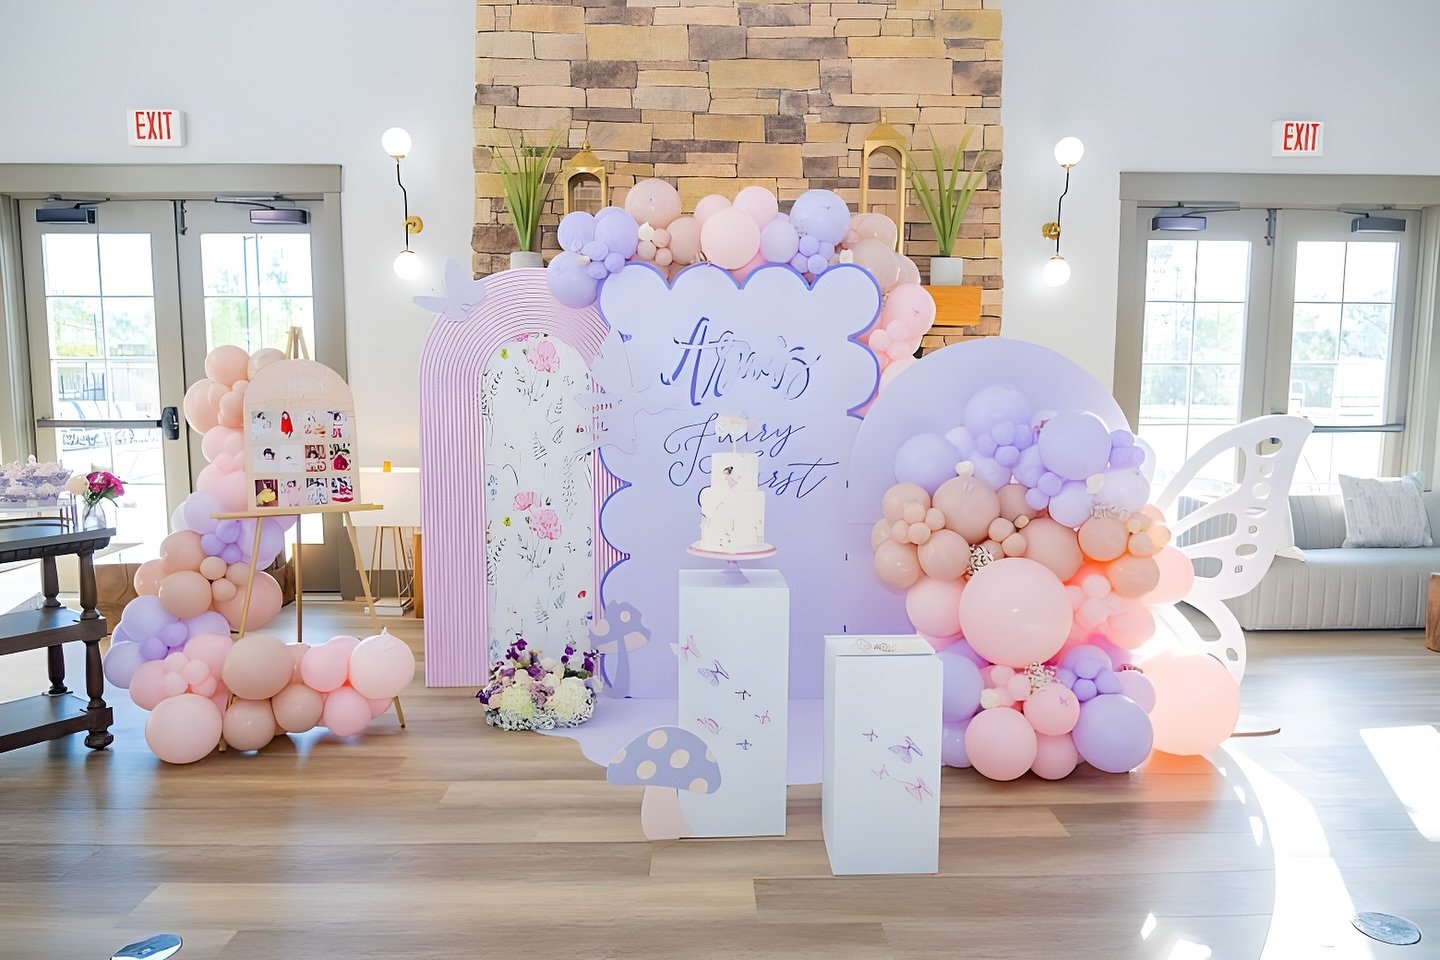 Arna&rsquo;s Fairy First 🧚🏼 A whimsical wonderland for this special occasion ✨ #rvaevents #rvaballoons #rvaballoondecor #rvakidsparties #rvamoms #midlomoms